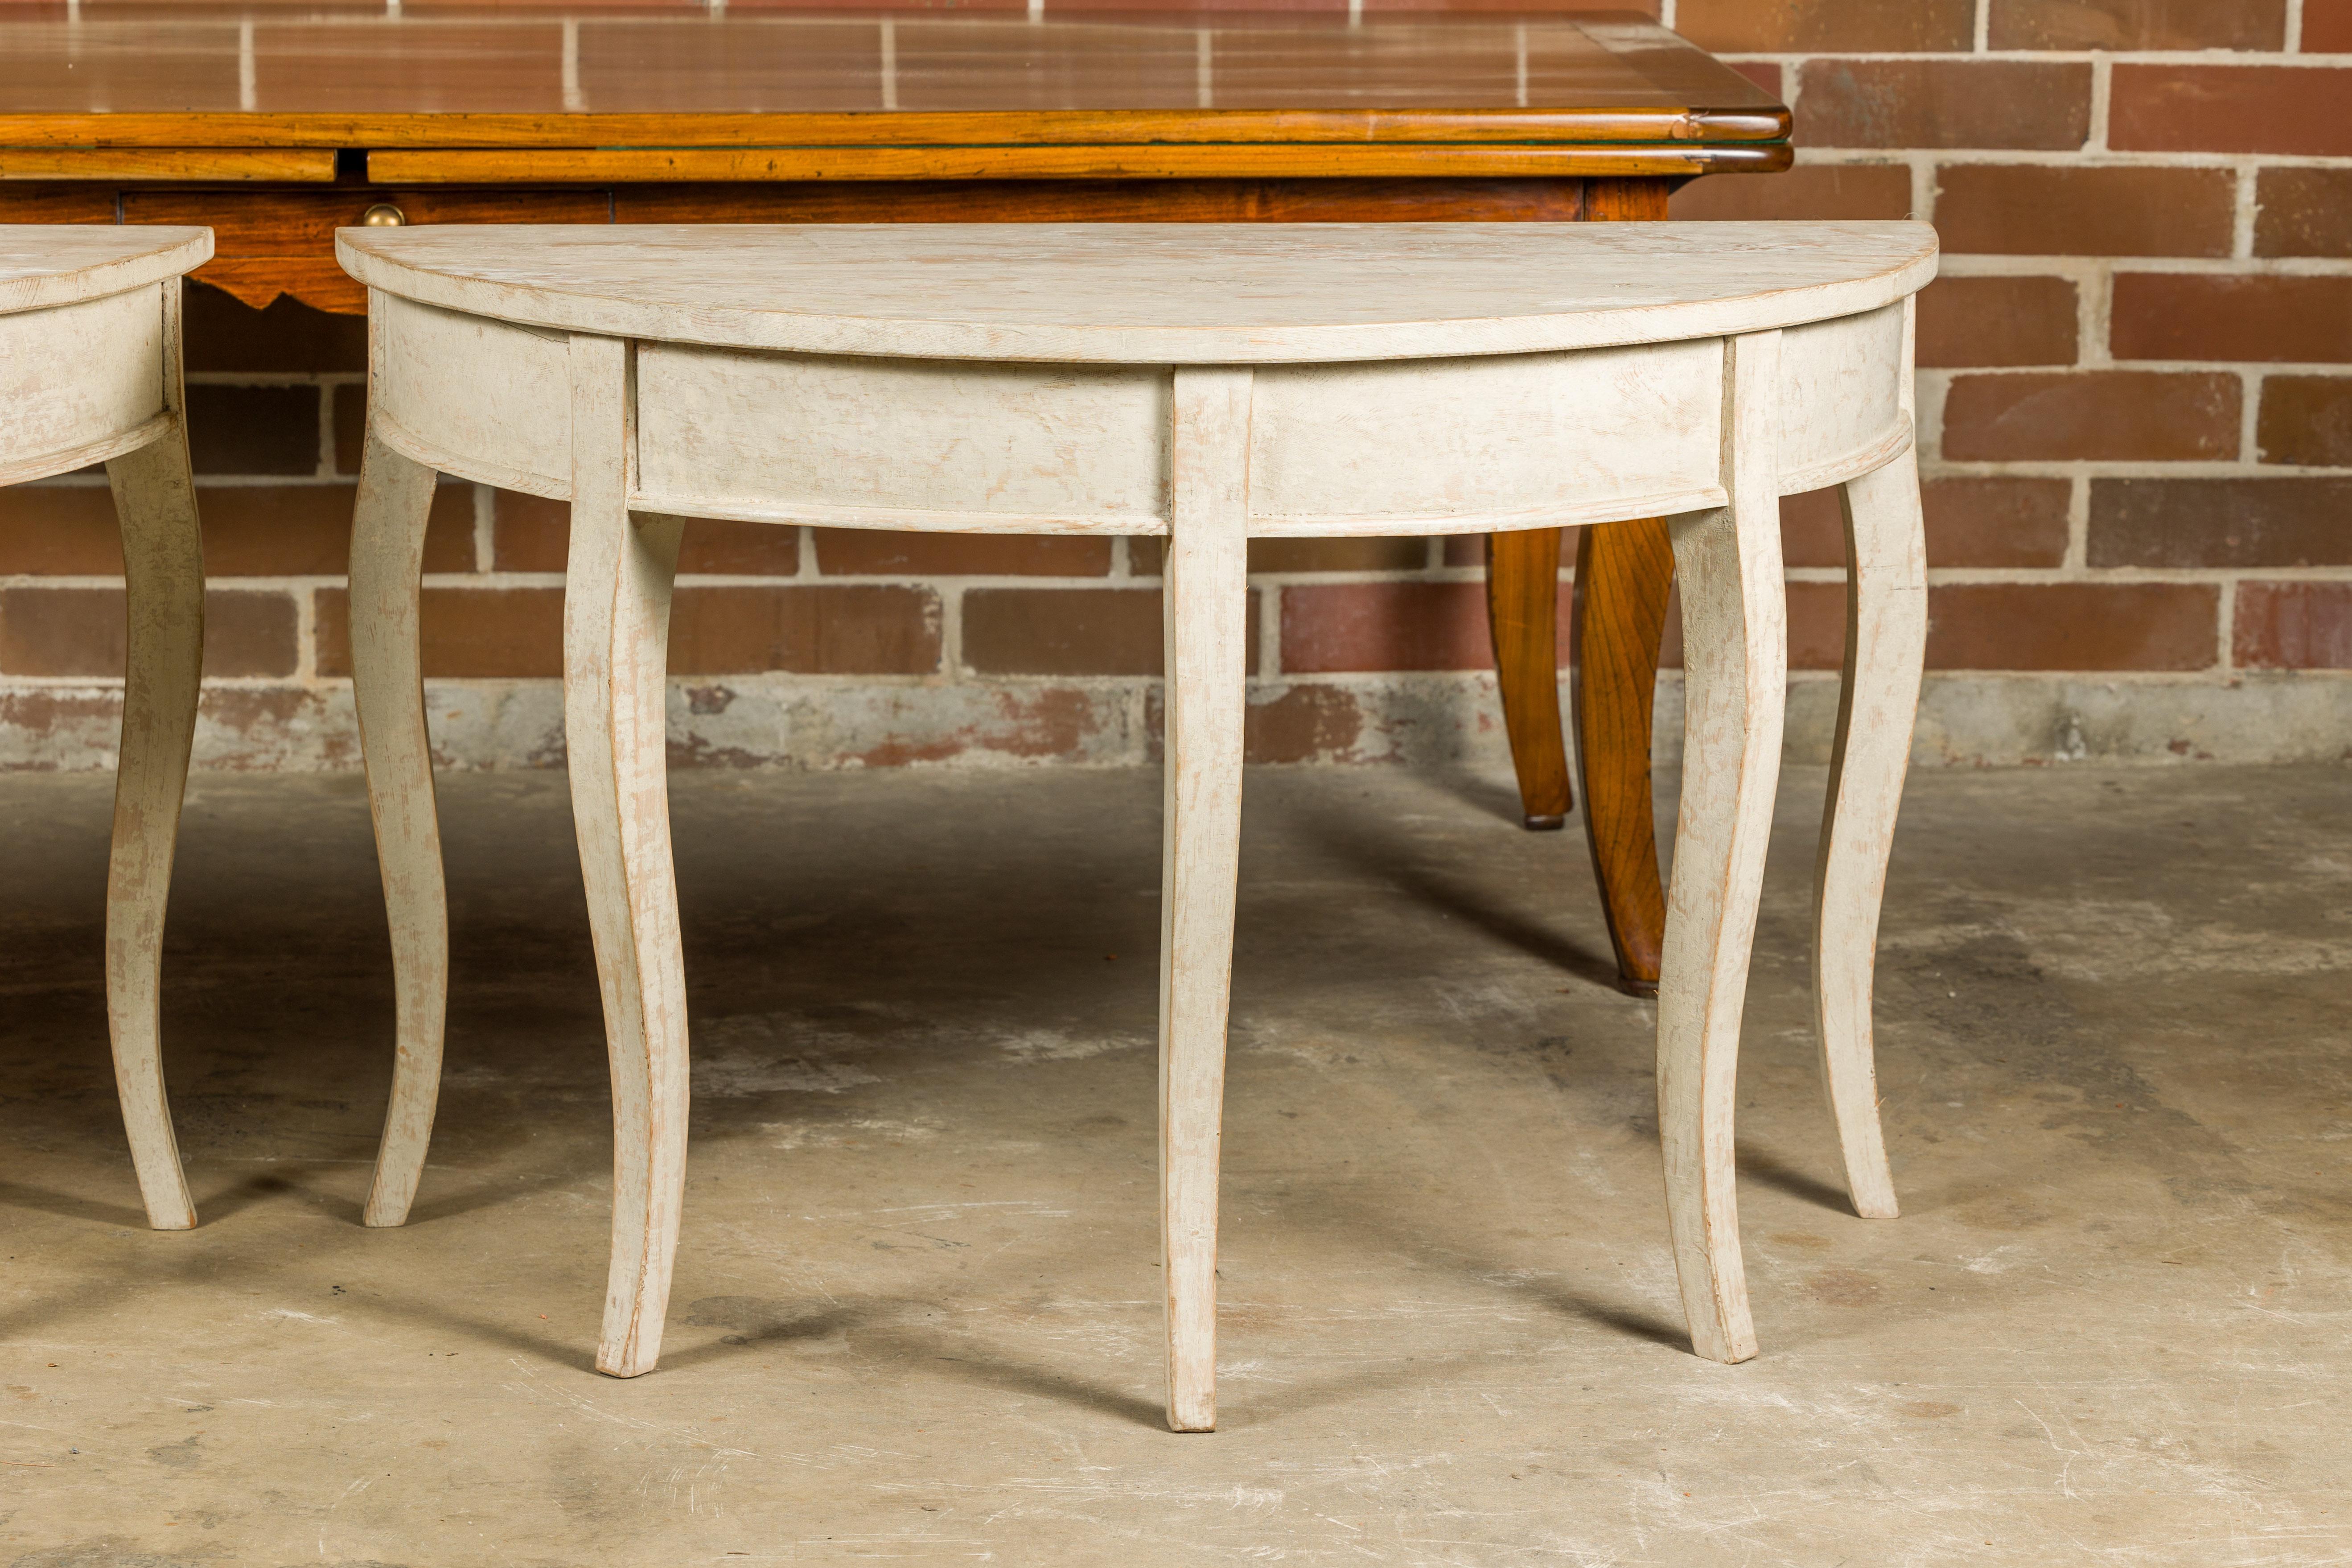 Swedish 19th Century Painted Demilune Tables with Cabriole Legs, a Pair In Good Condition For Sale In Atlanta, GA